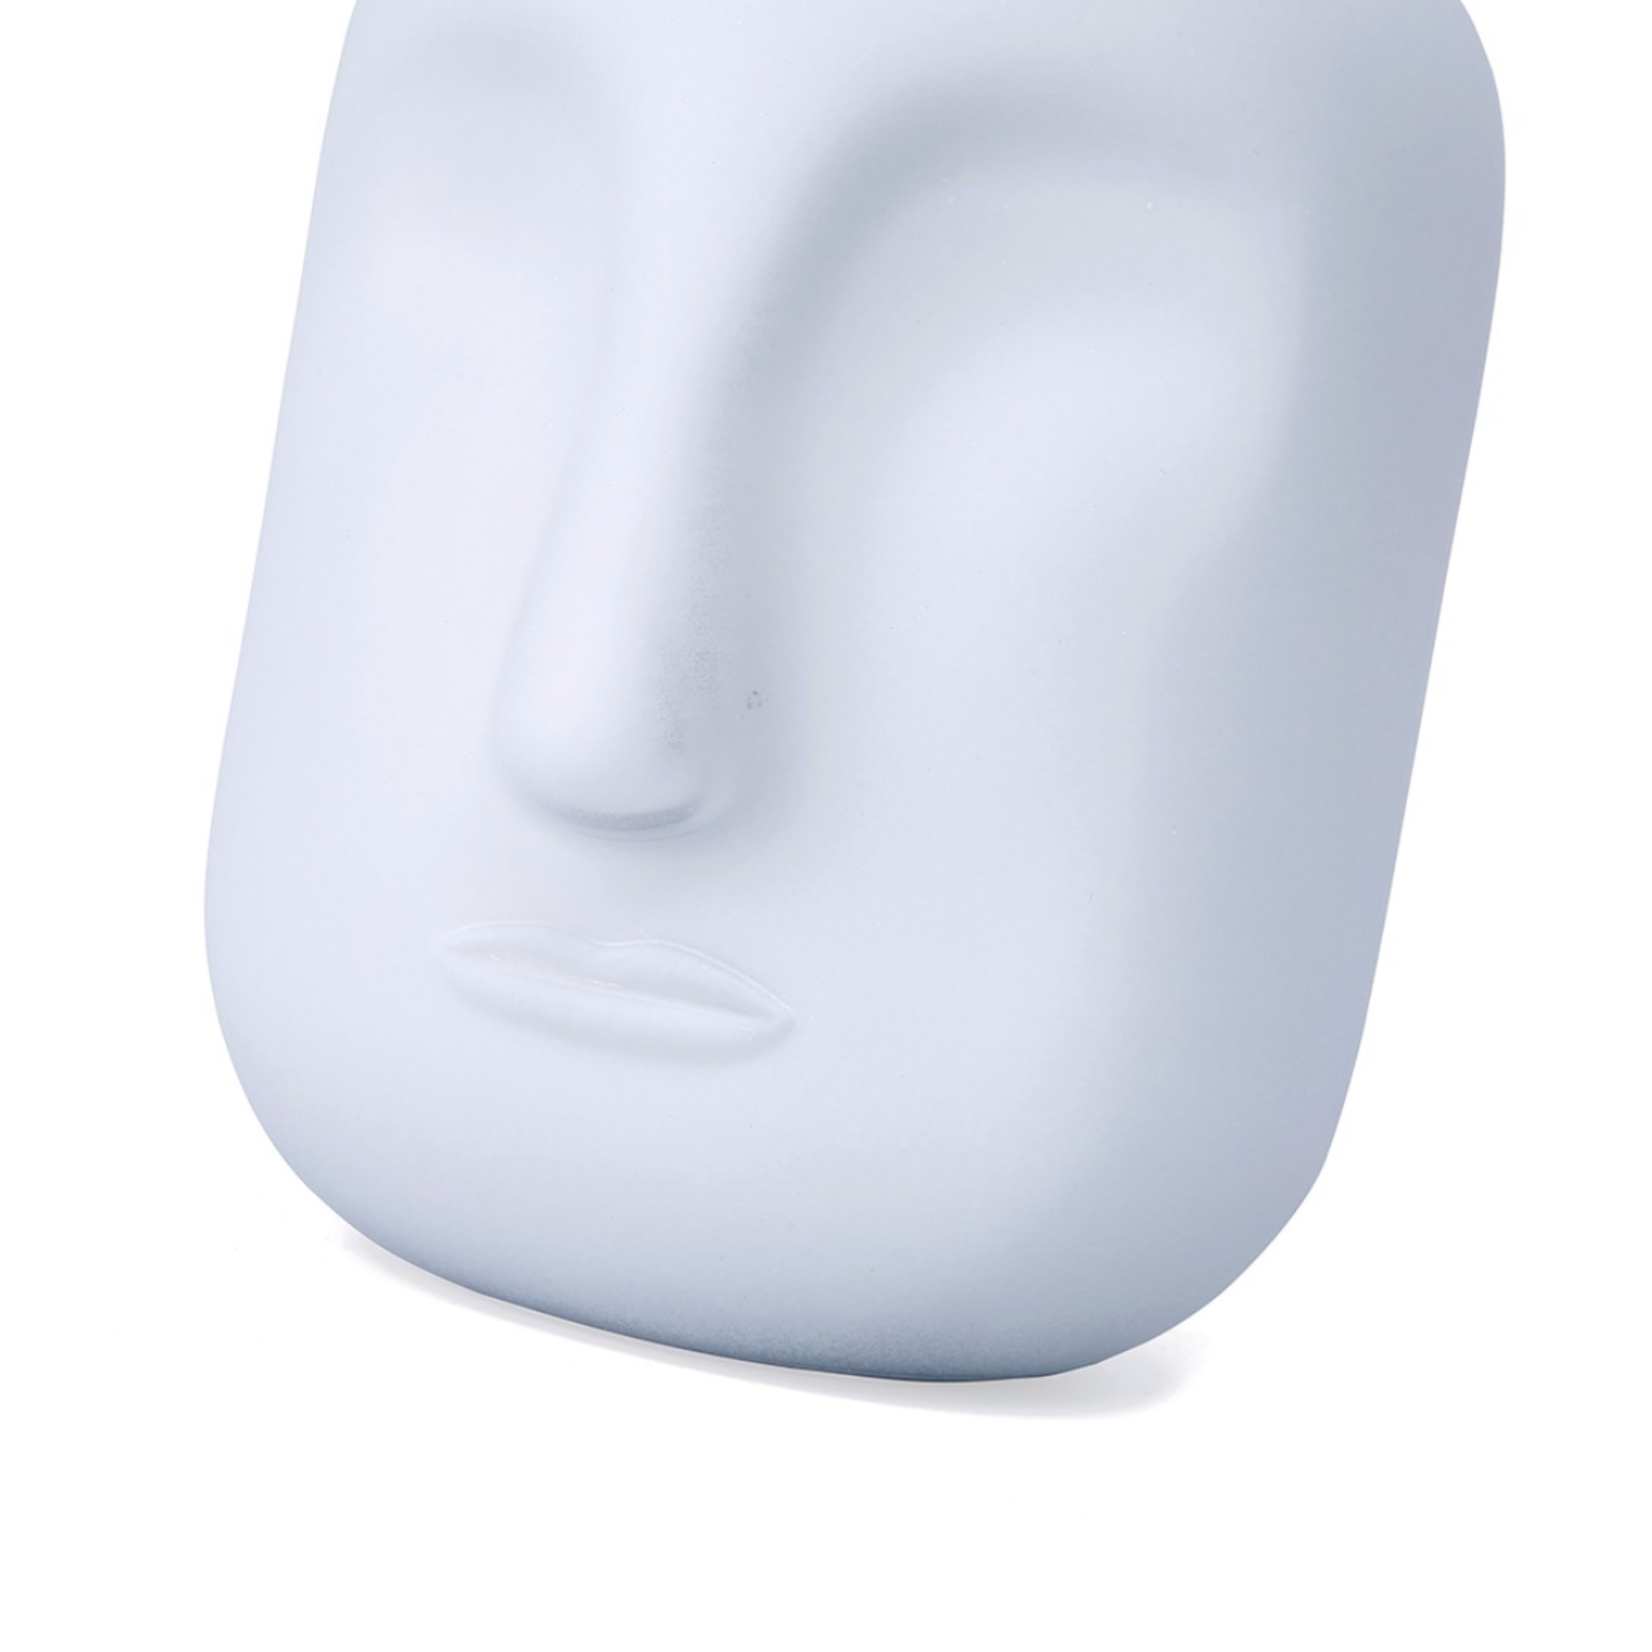 60% off was $25 now $10. 8"h x 6.25” WHITE GLASS FACE VASE